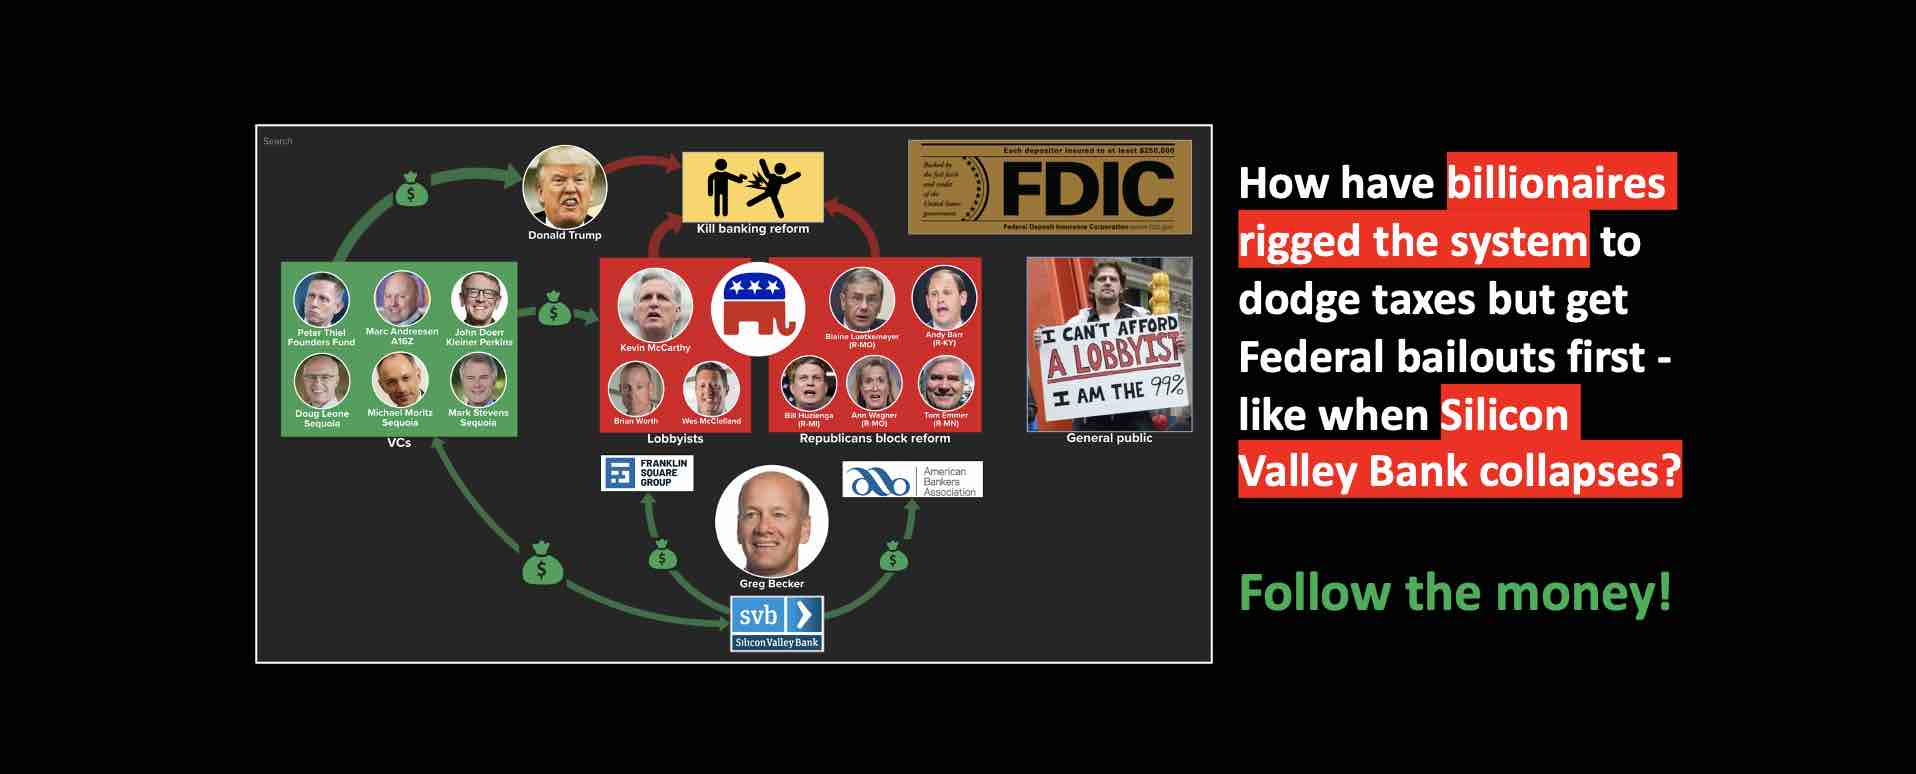 How have billionaires have rigged the system to dodge taxes but get Federal bailouts first - like when Silicon Valley Bank collapses? Follow the money.